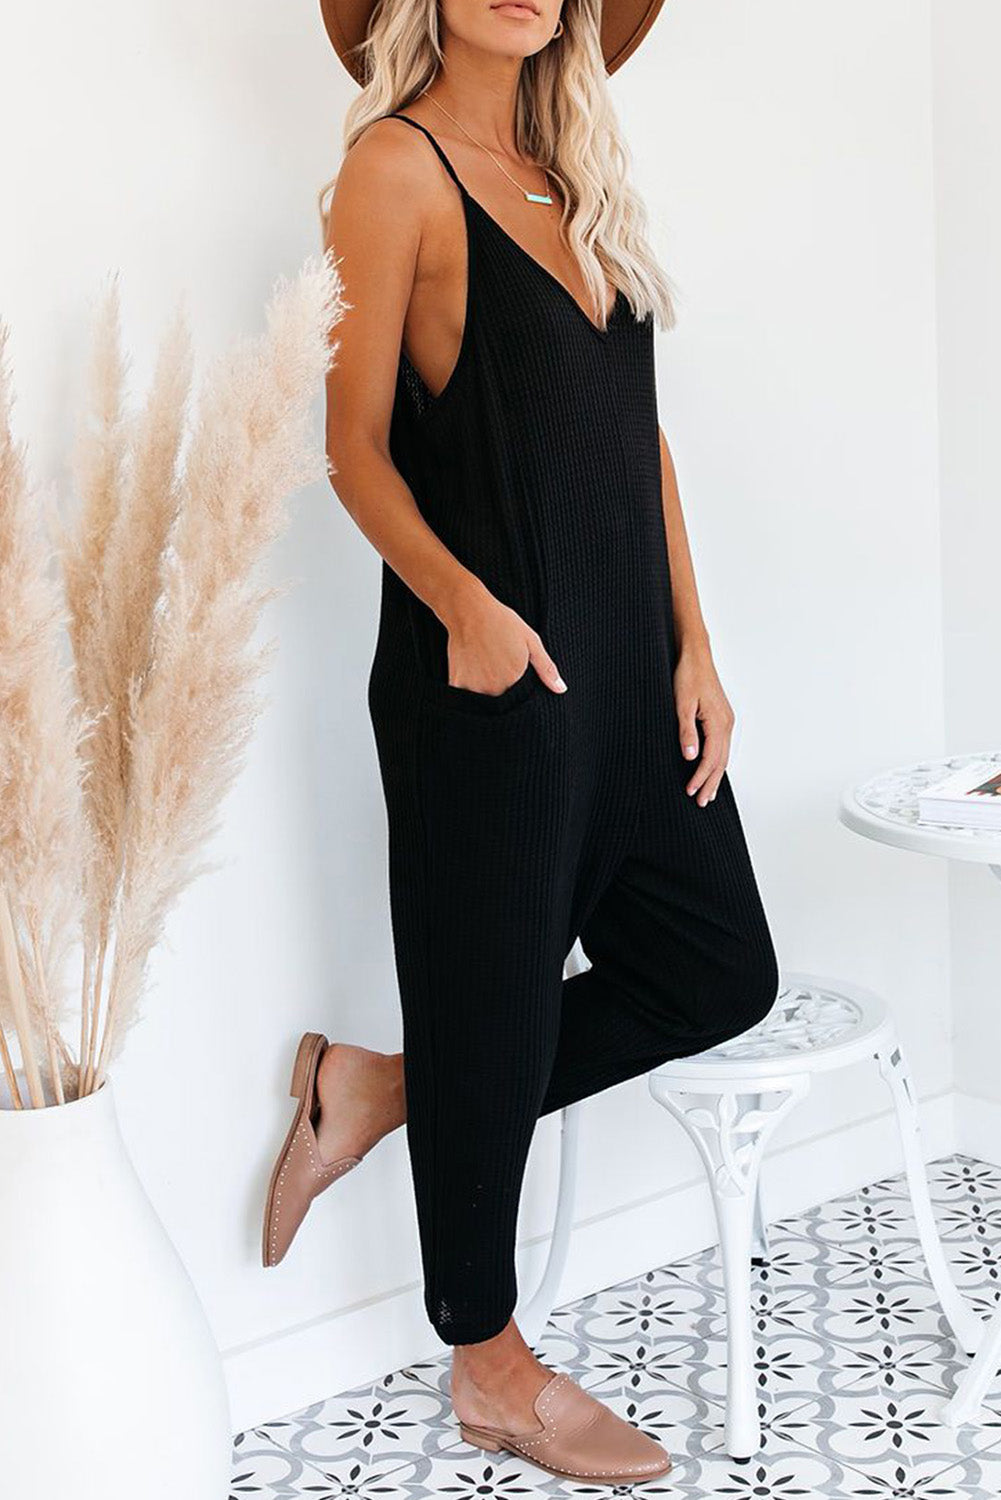 Textured Sleeveless V-Neck Pocketed Casual Jumpsuit